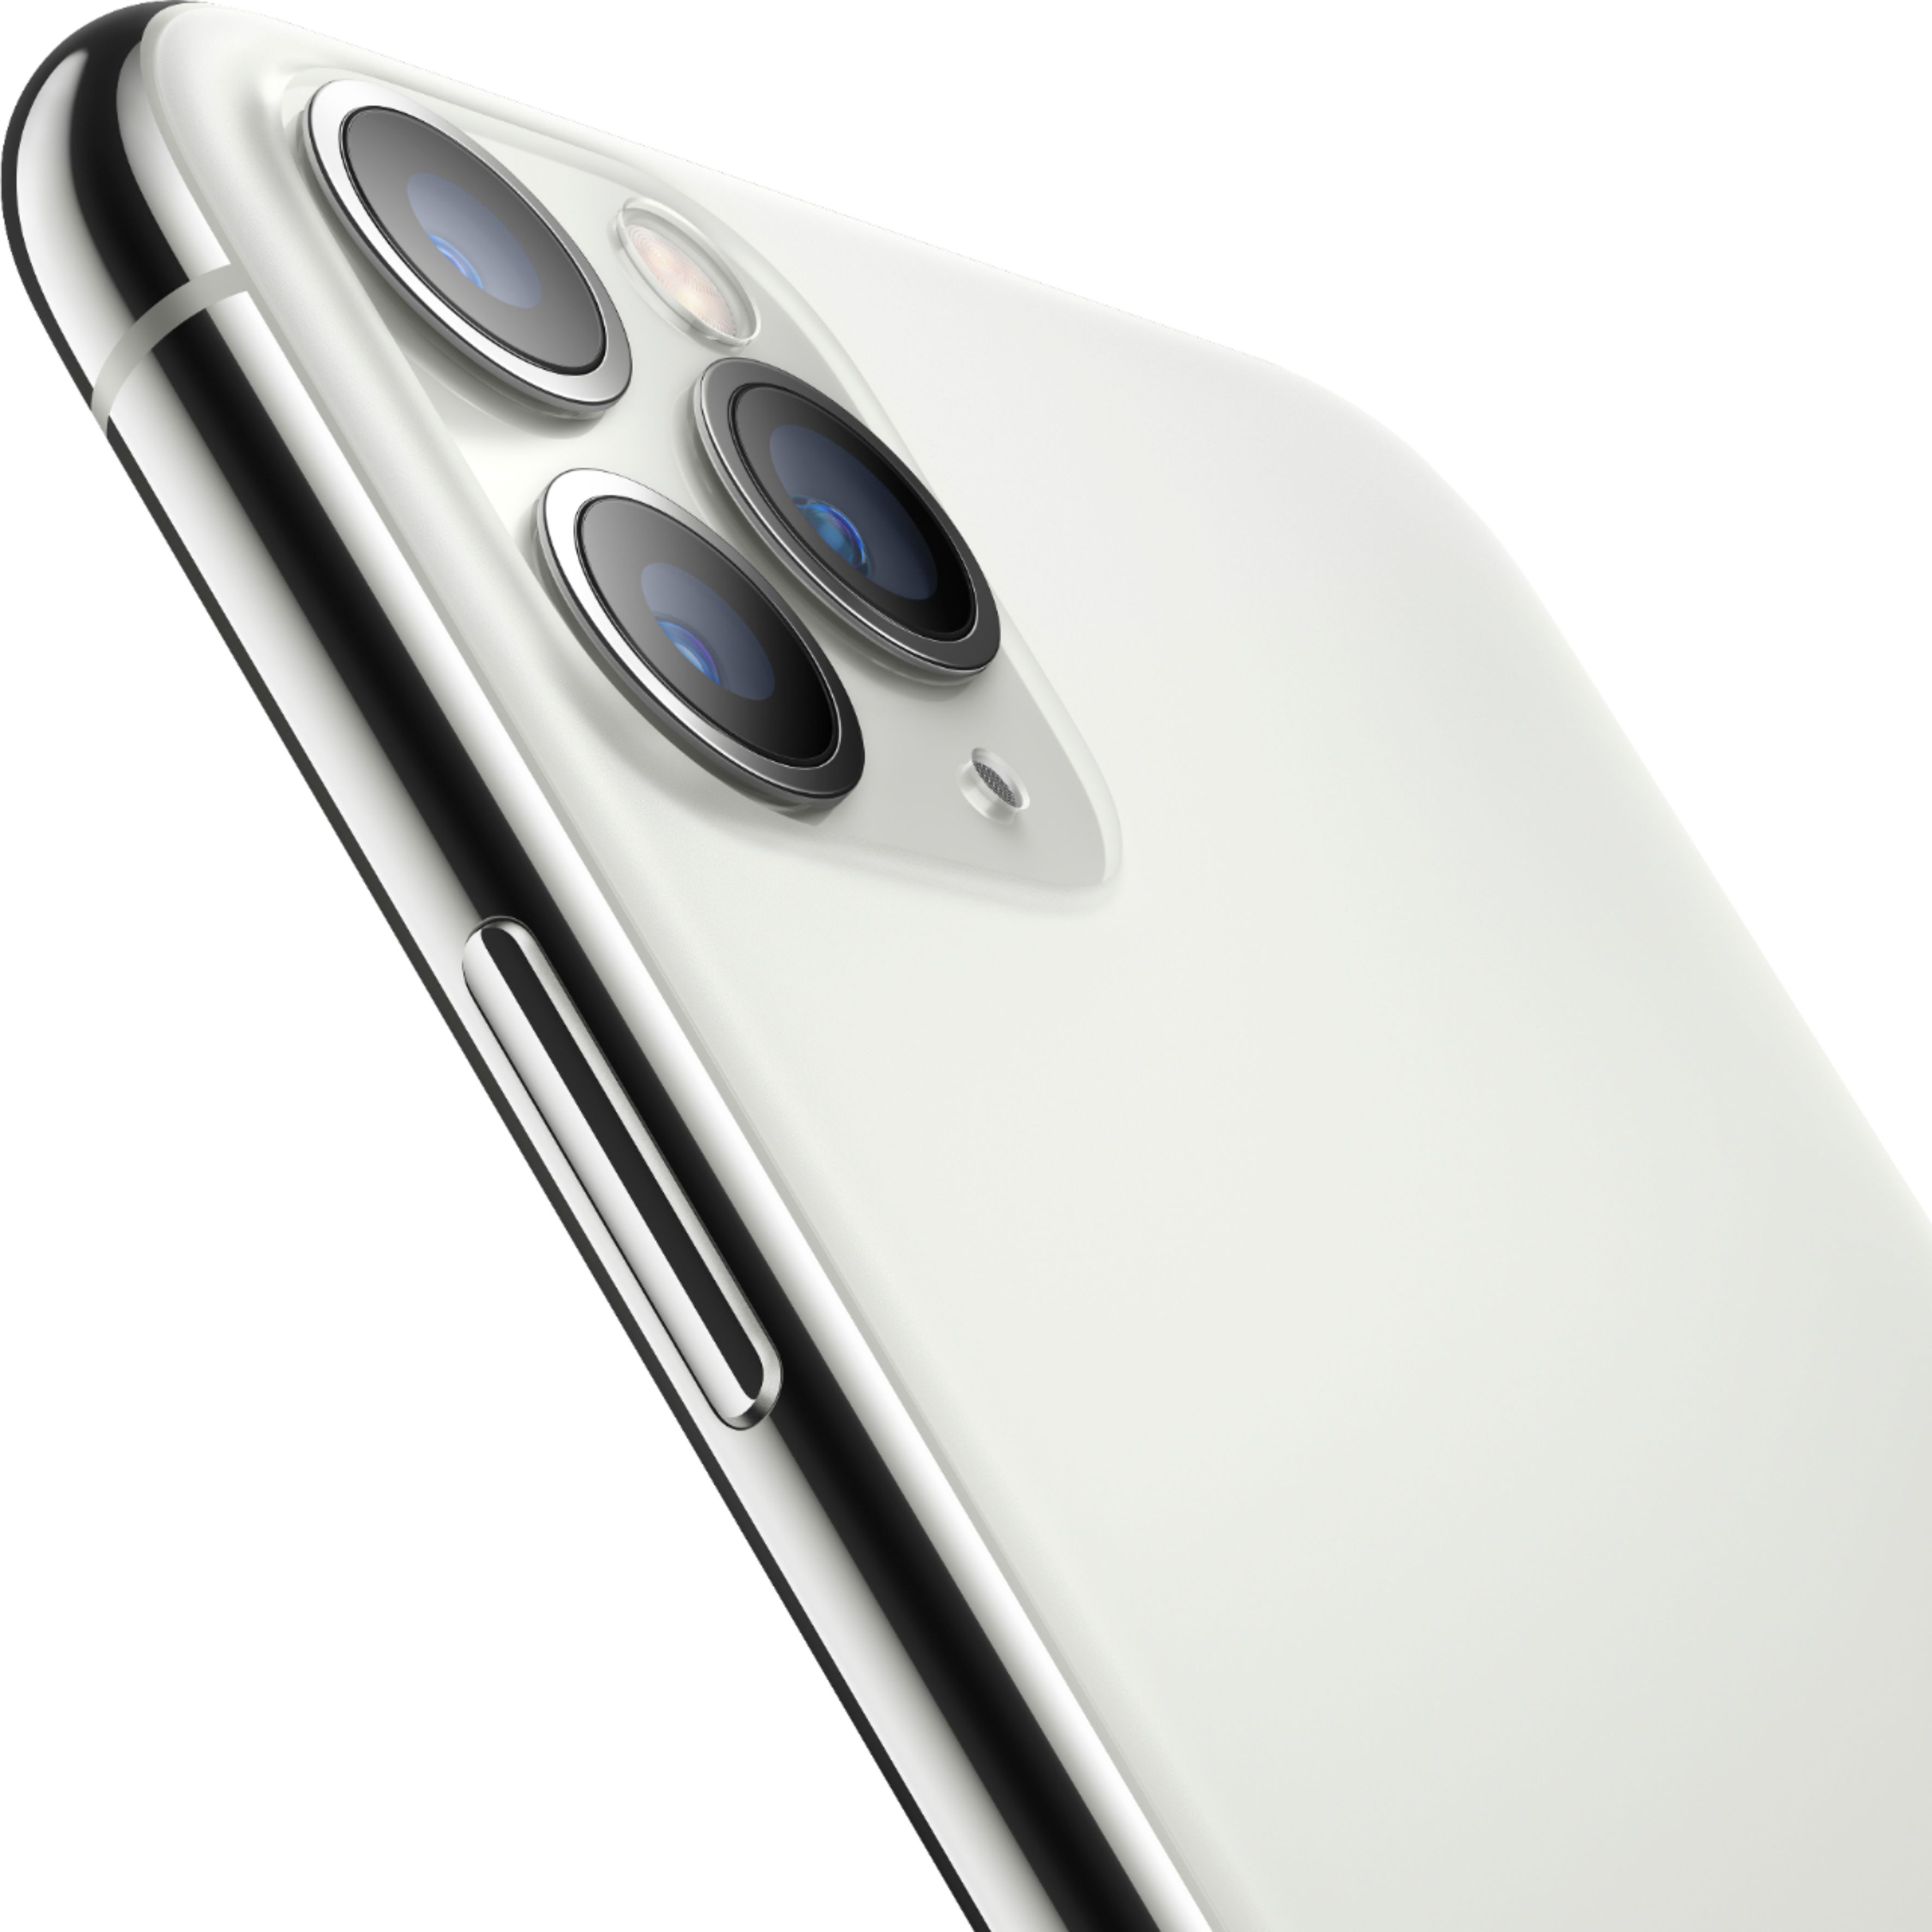 Apple Iphone 11 Pro 256gb Silver At T Mwcn2ll A Best Buy